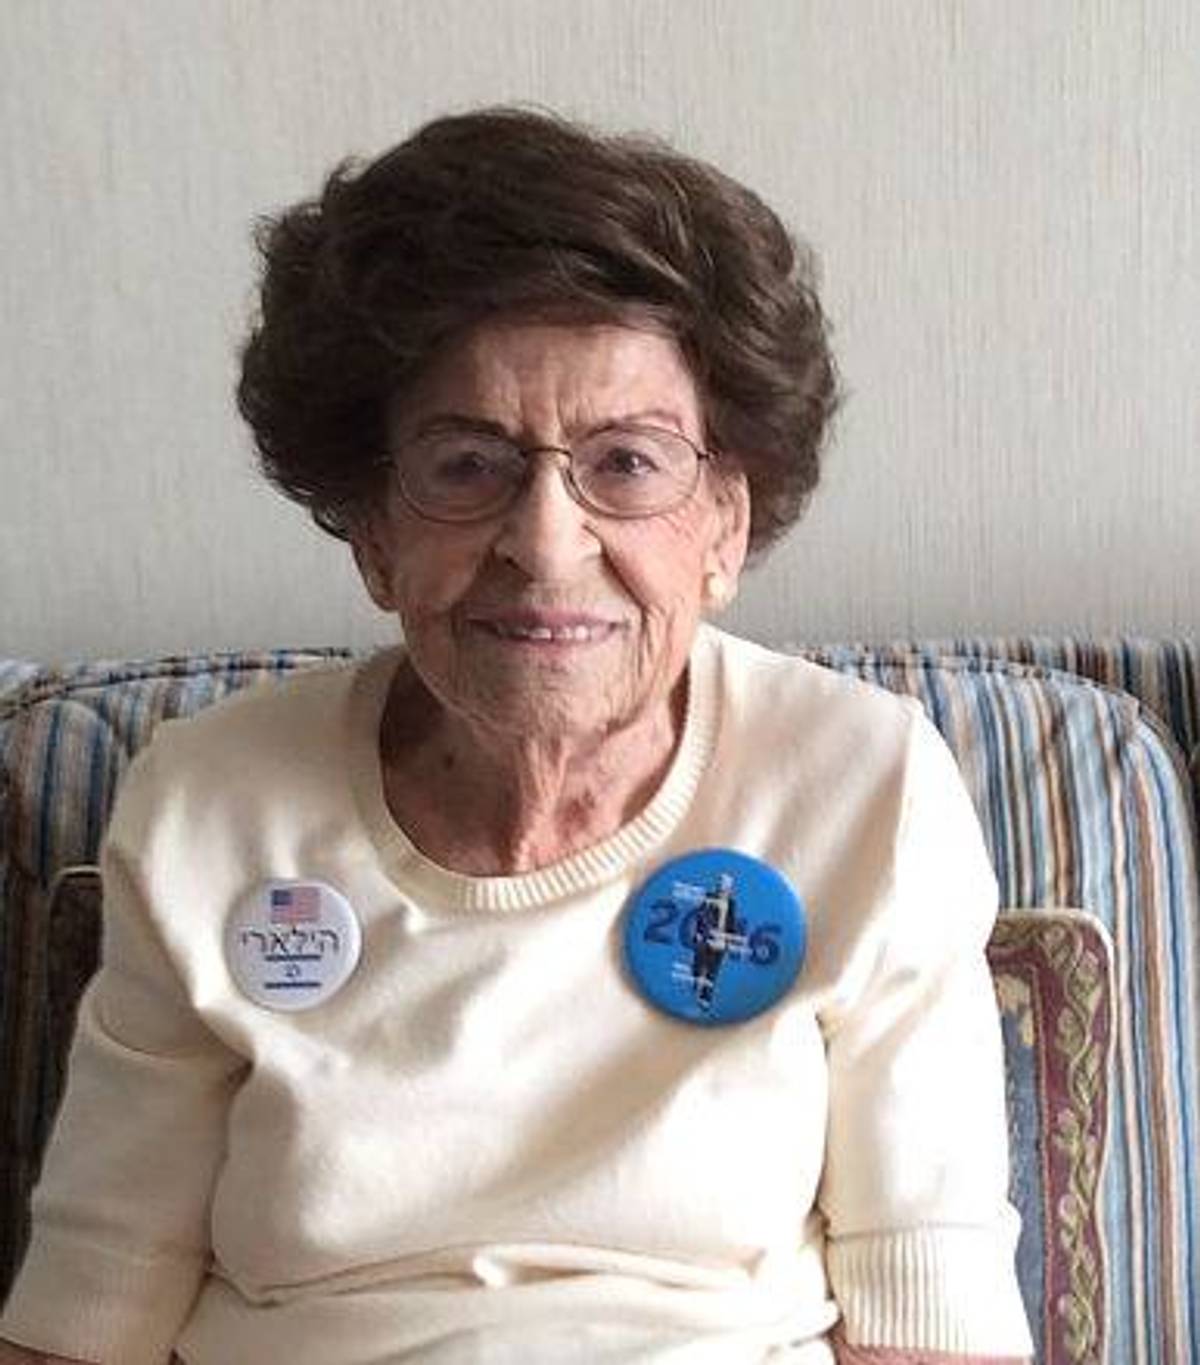 Said Roselyn Kraus, 99, from Skokie, IL: “For the first time in my life I voted early to make sure my vote counts. I couldn’t feel more strongly the urgency of electing Hillary; she is eminently qualified.”